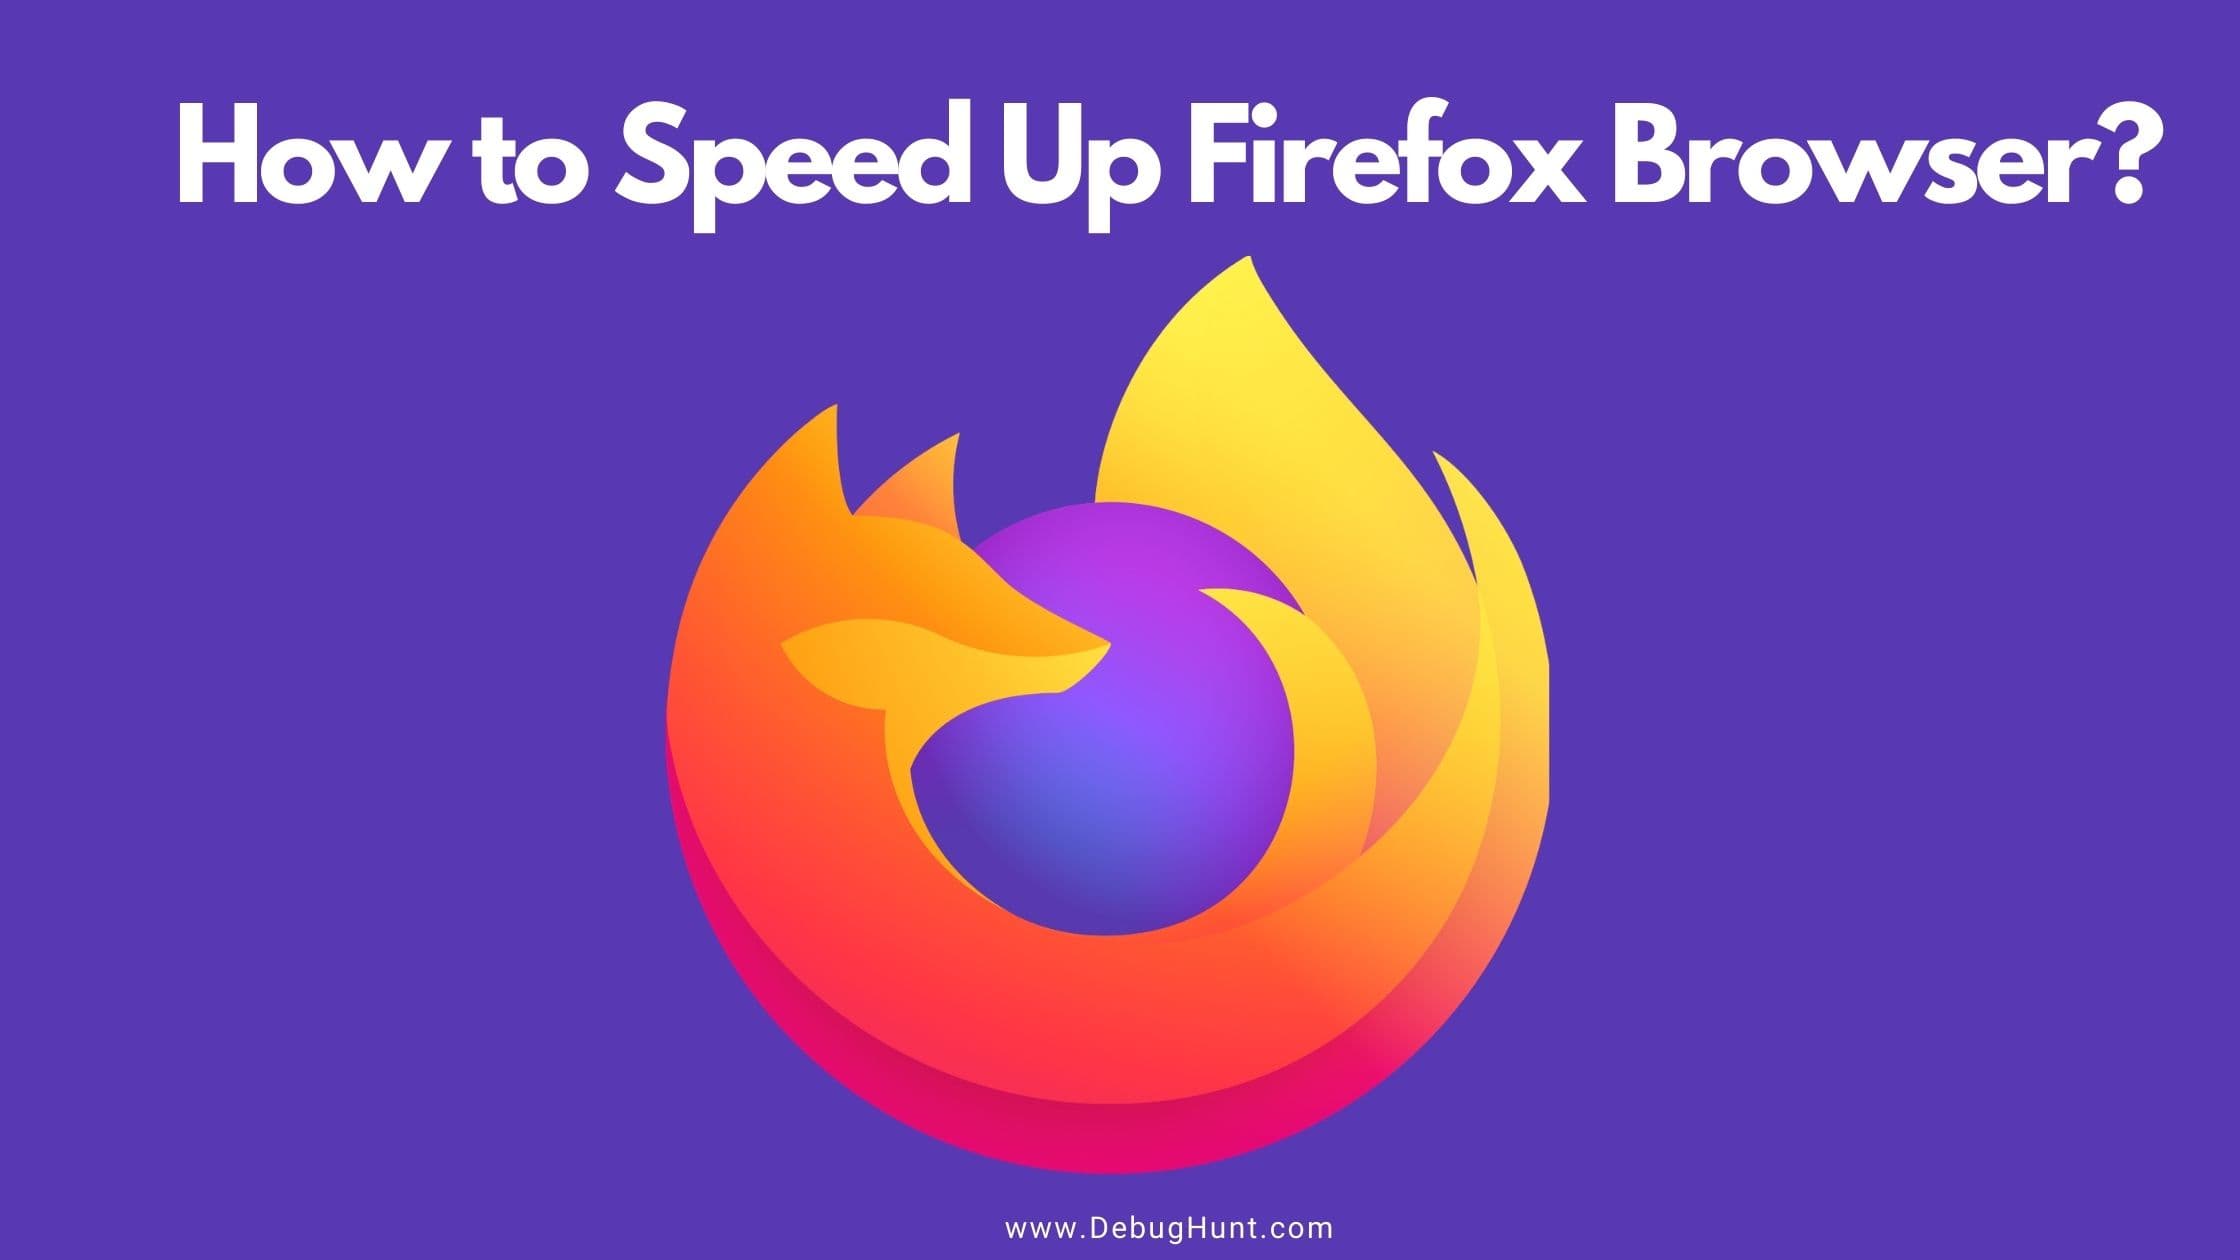 How to Speed Up Firefox Browser